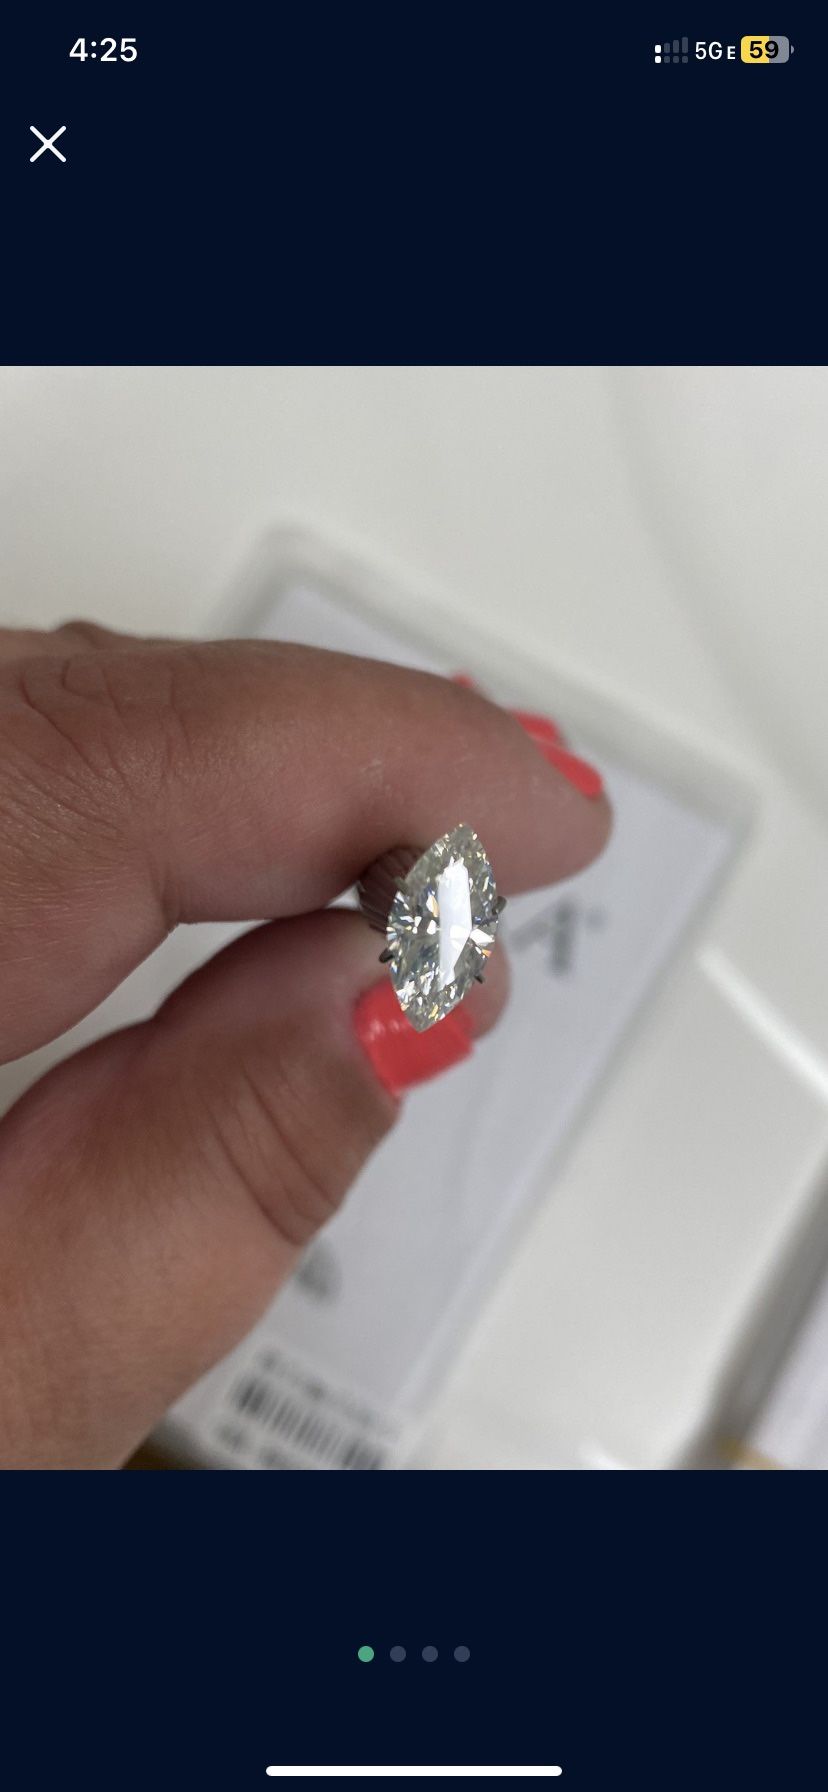 2 Carat Marquise Cut Lab Created Moissanite BEST QUALITY!! D Color VVS1, USA Sourced 🇺🇸